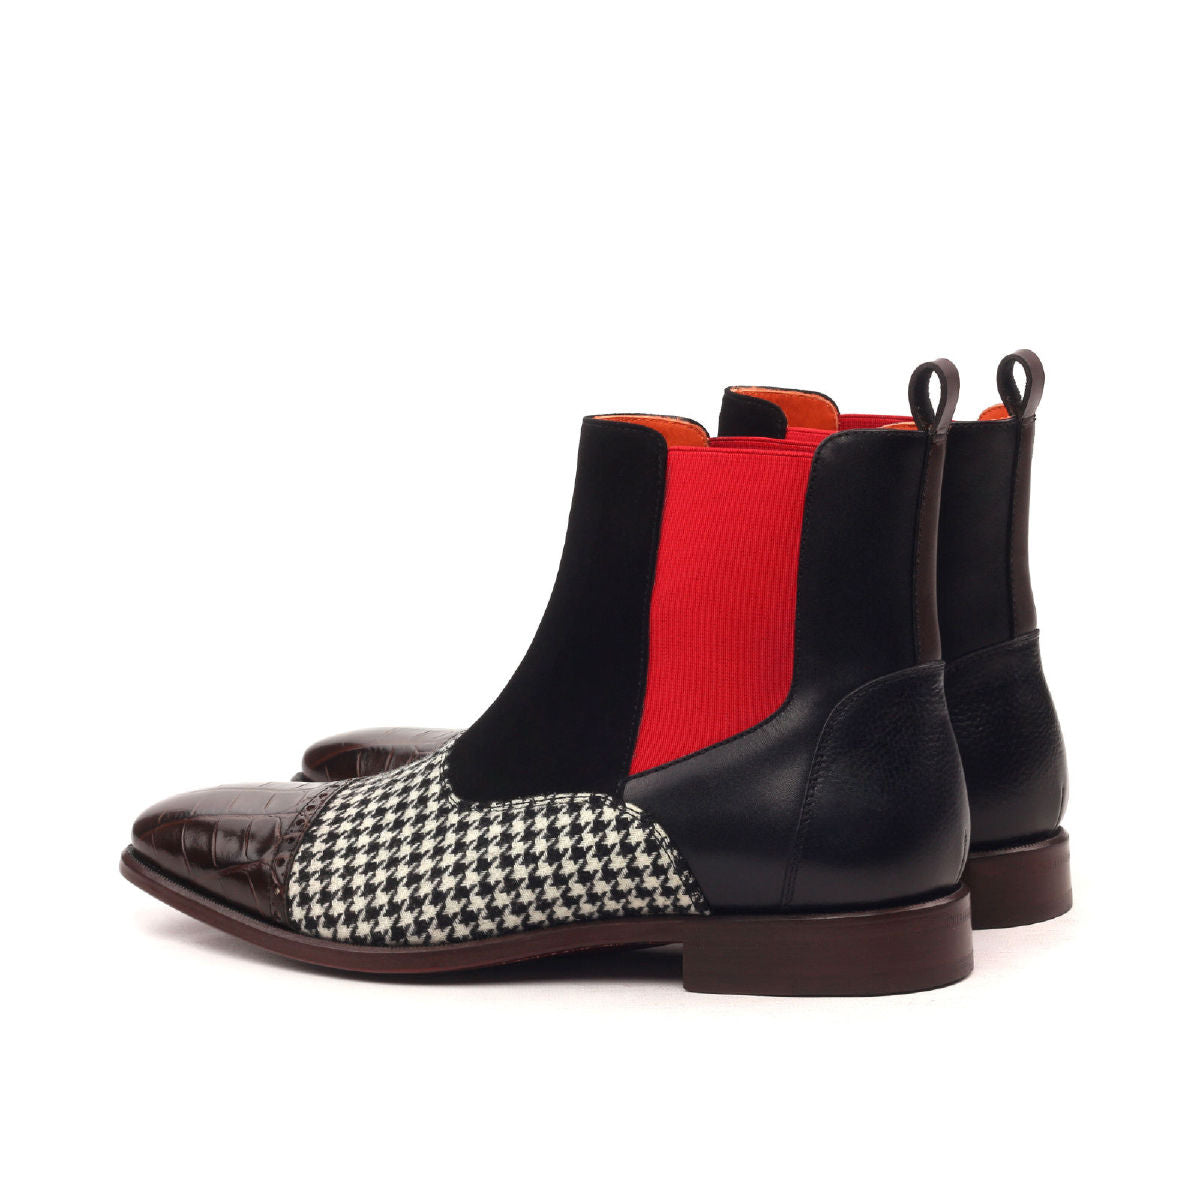 Black Calf & Houndstooth Chelsea Boot